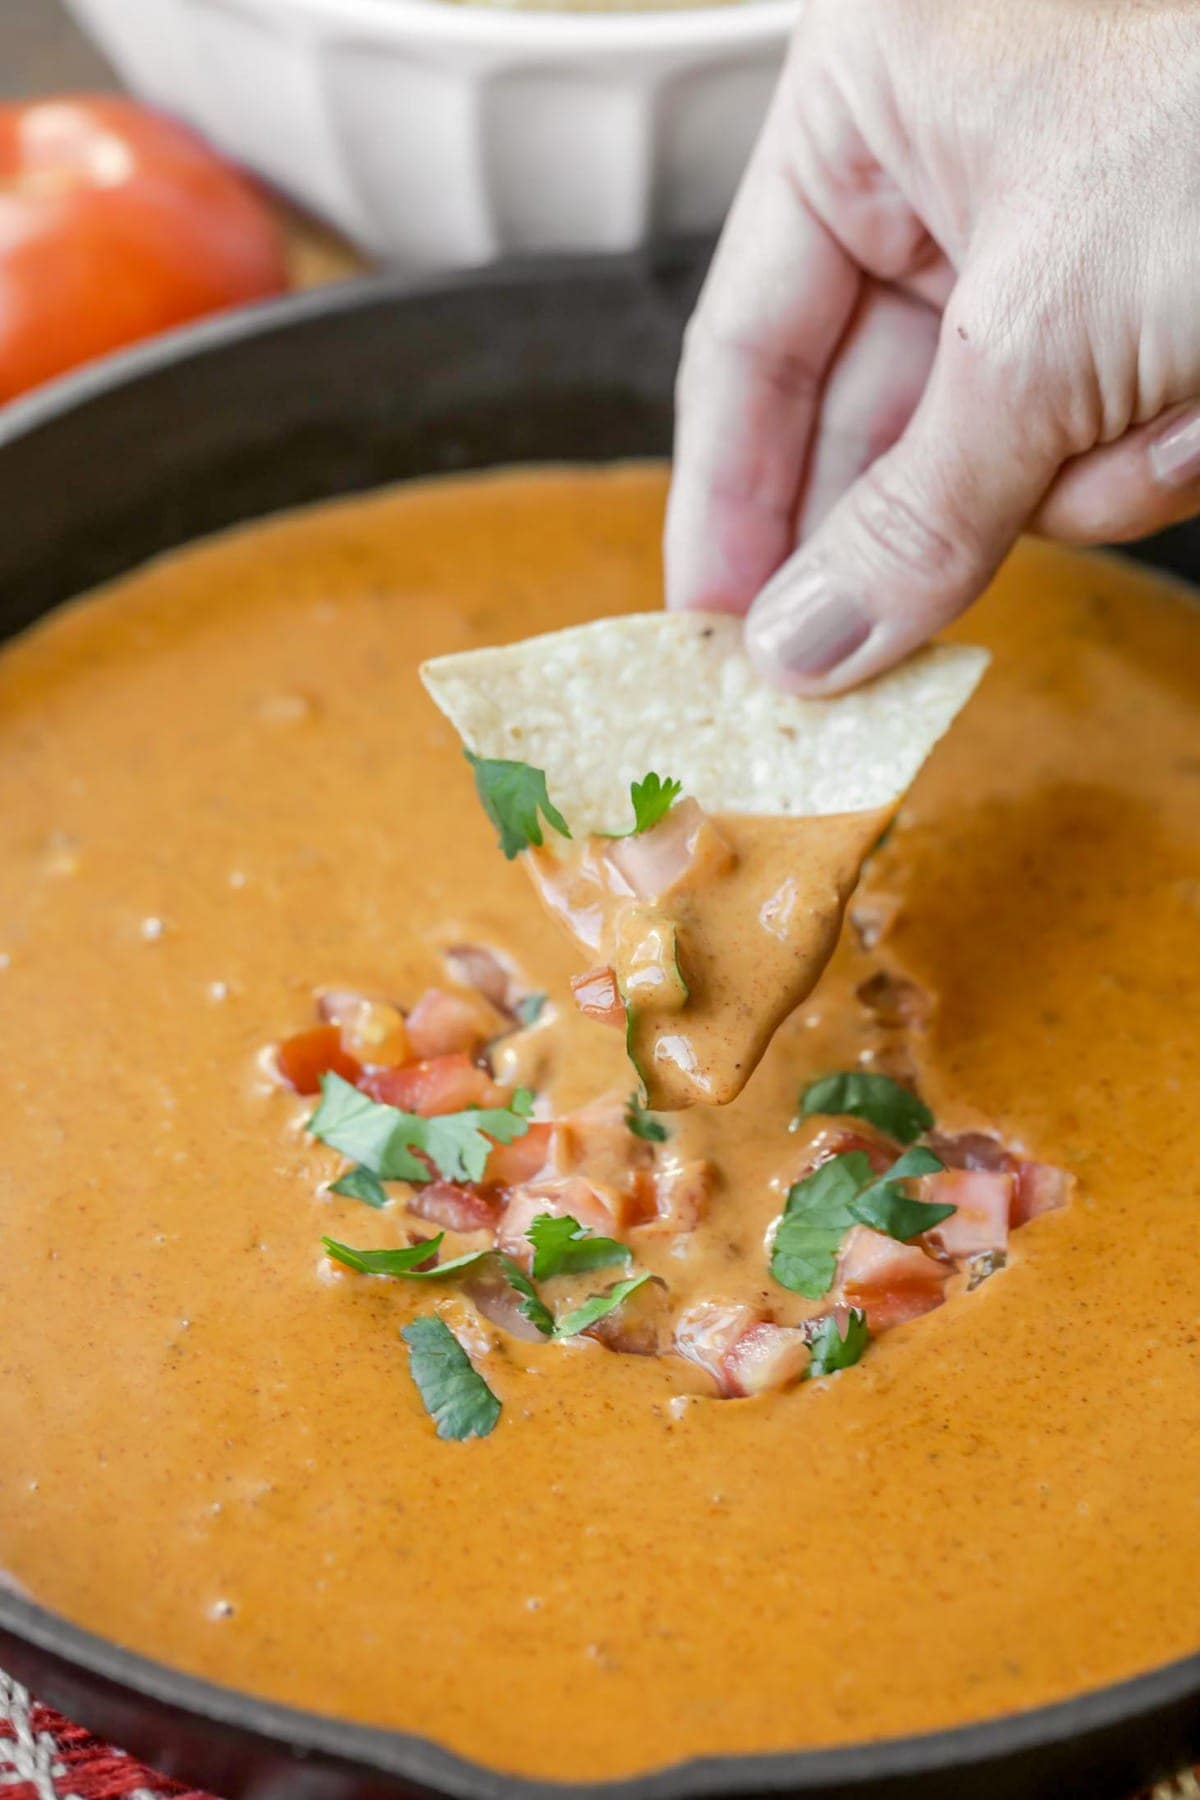 Chili's Queso topped with cilantro and tomatoess